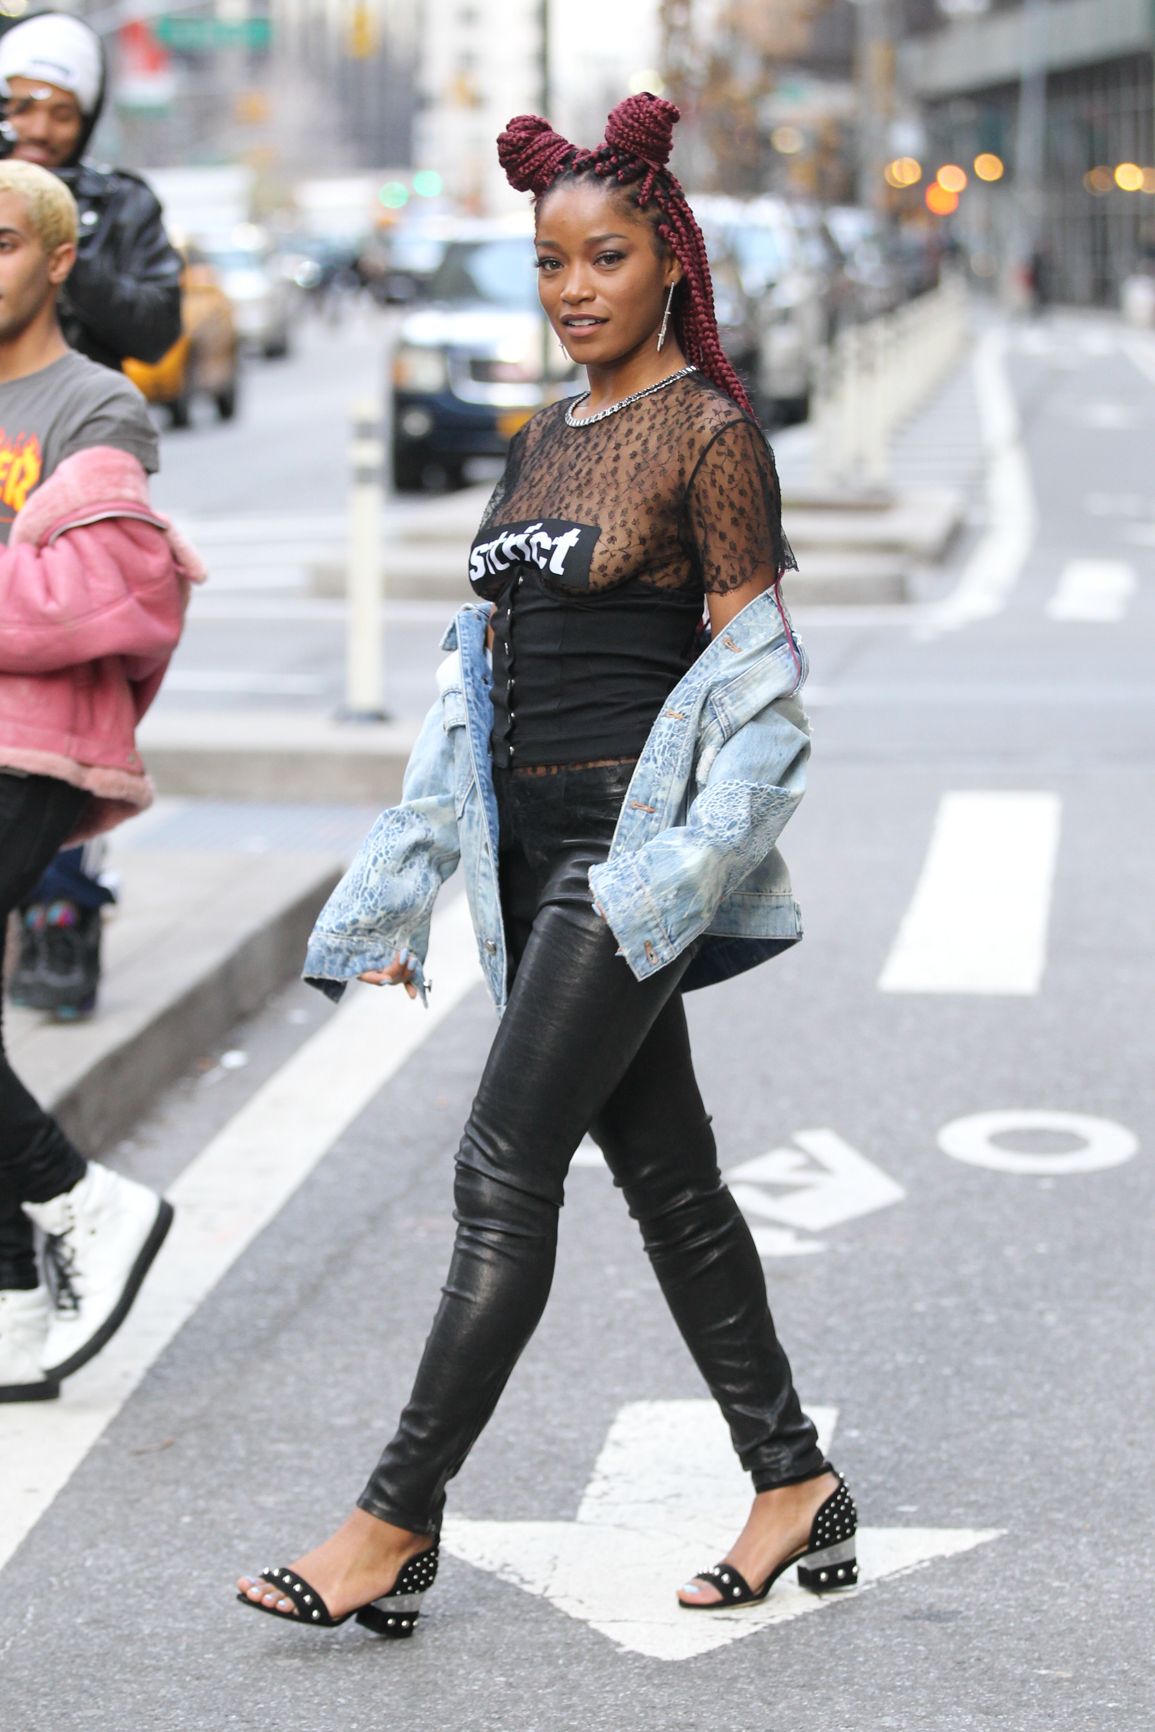 Keke Palmer out in New York City